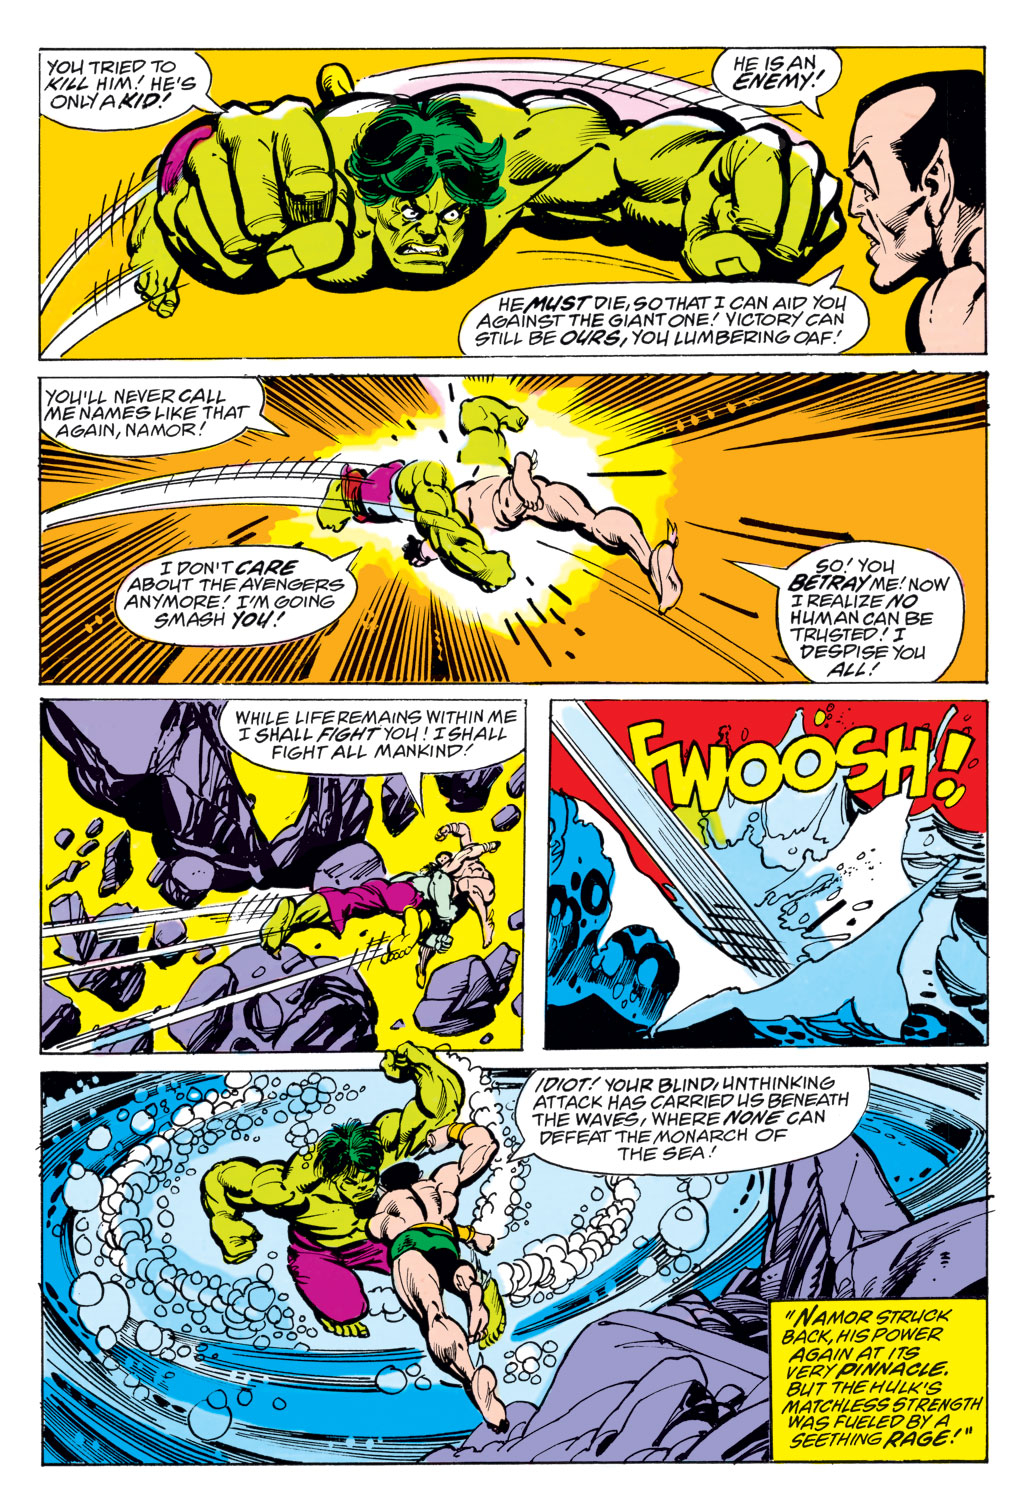 What If? (1977) issue 3 - The Avengers had never been - Page 34